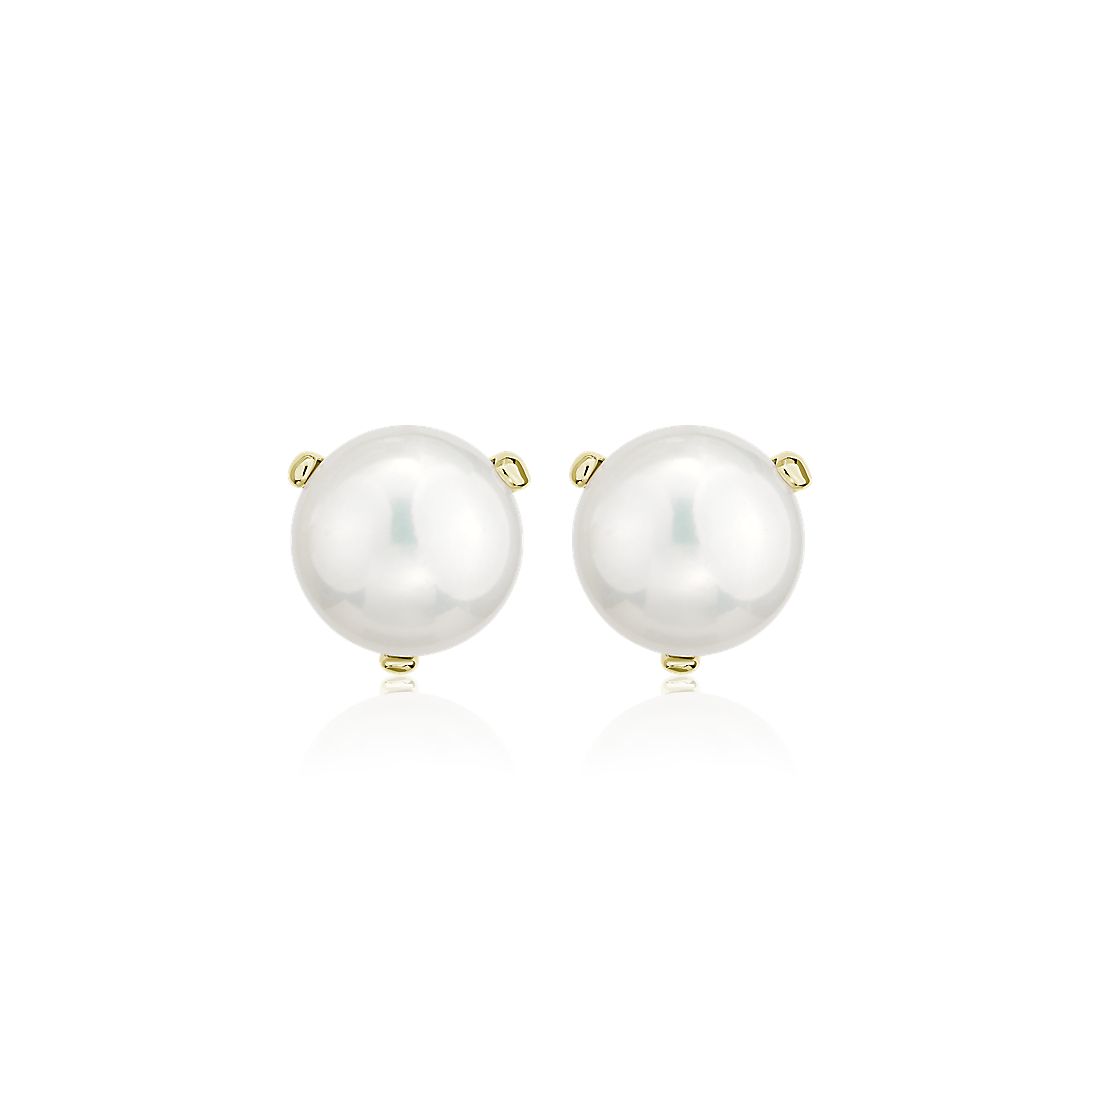 Freshwater Cultured Pearl Button Stud Earrings in 14k Yellow Gold (9.5-10mm)